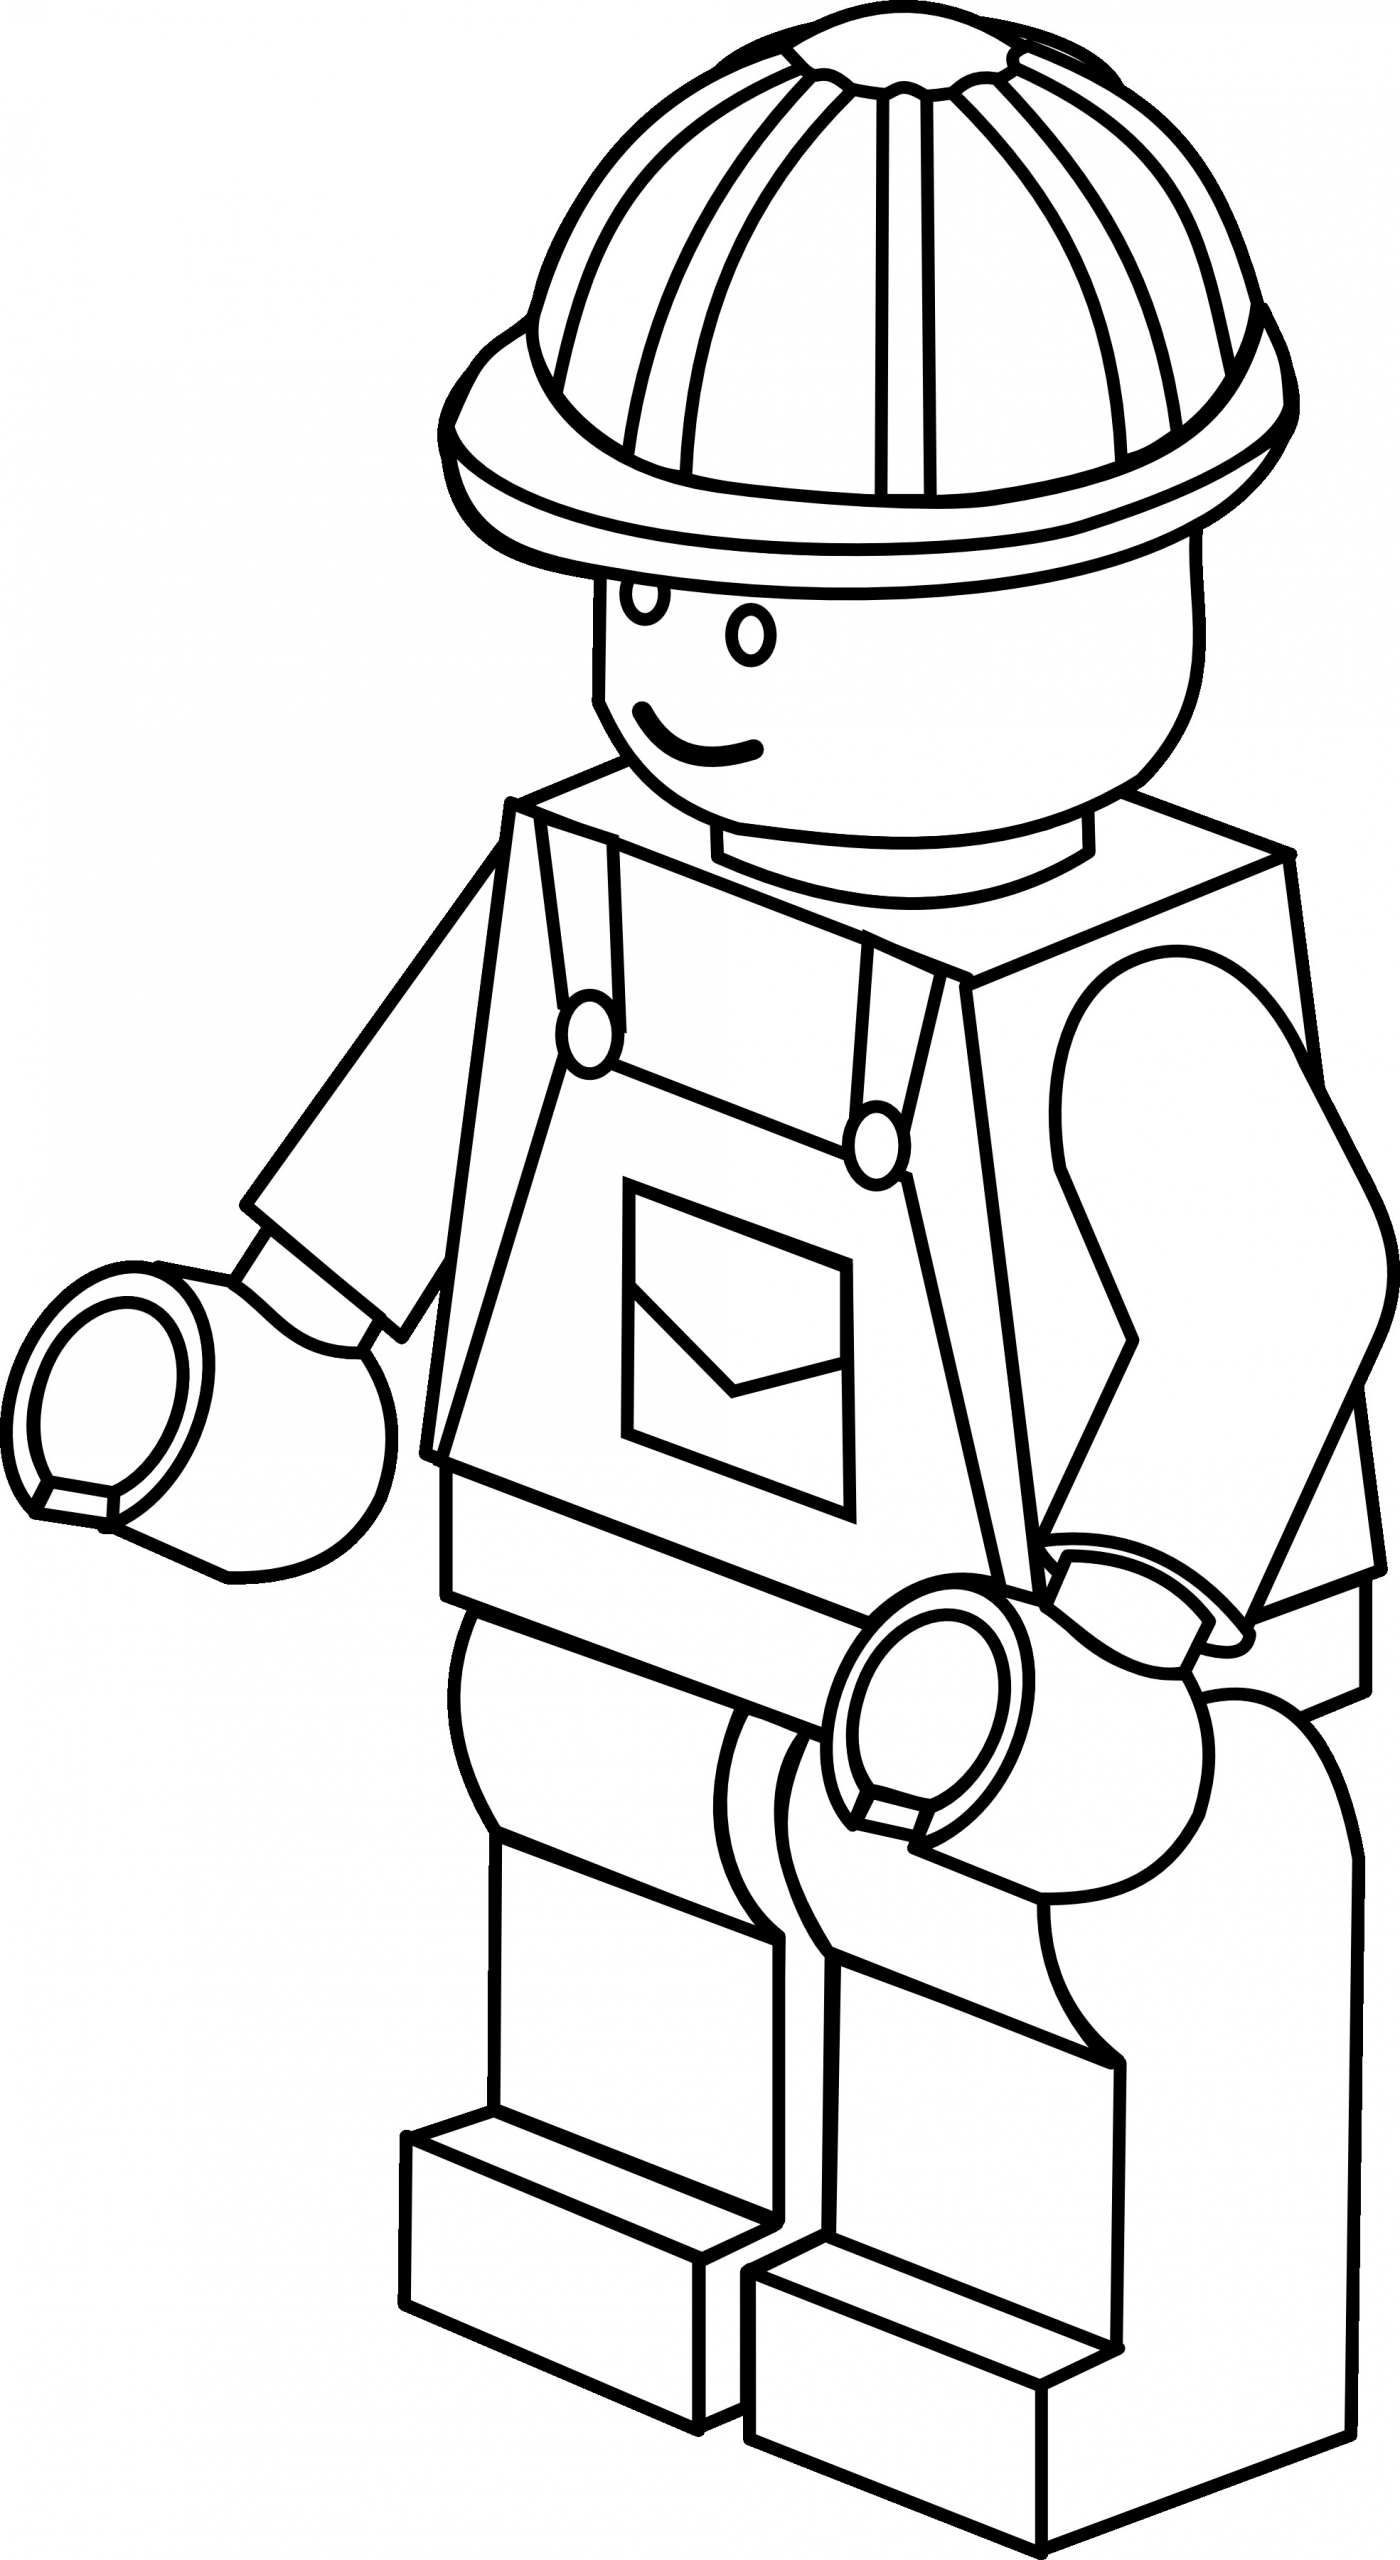 Coloring Pages For Kids Lego
 More plex LEGO figure colouring sheet